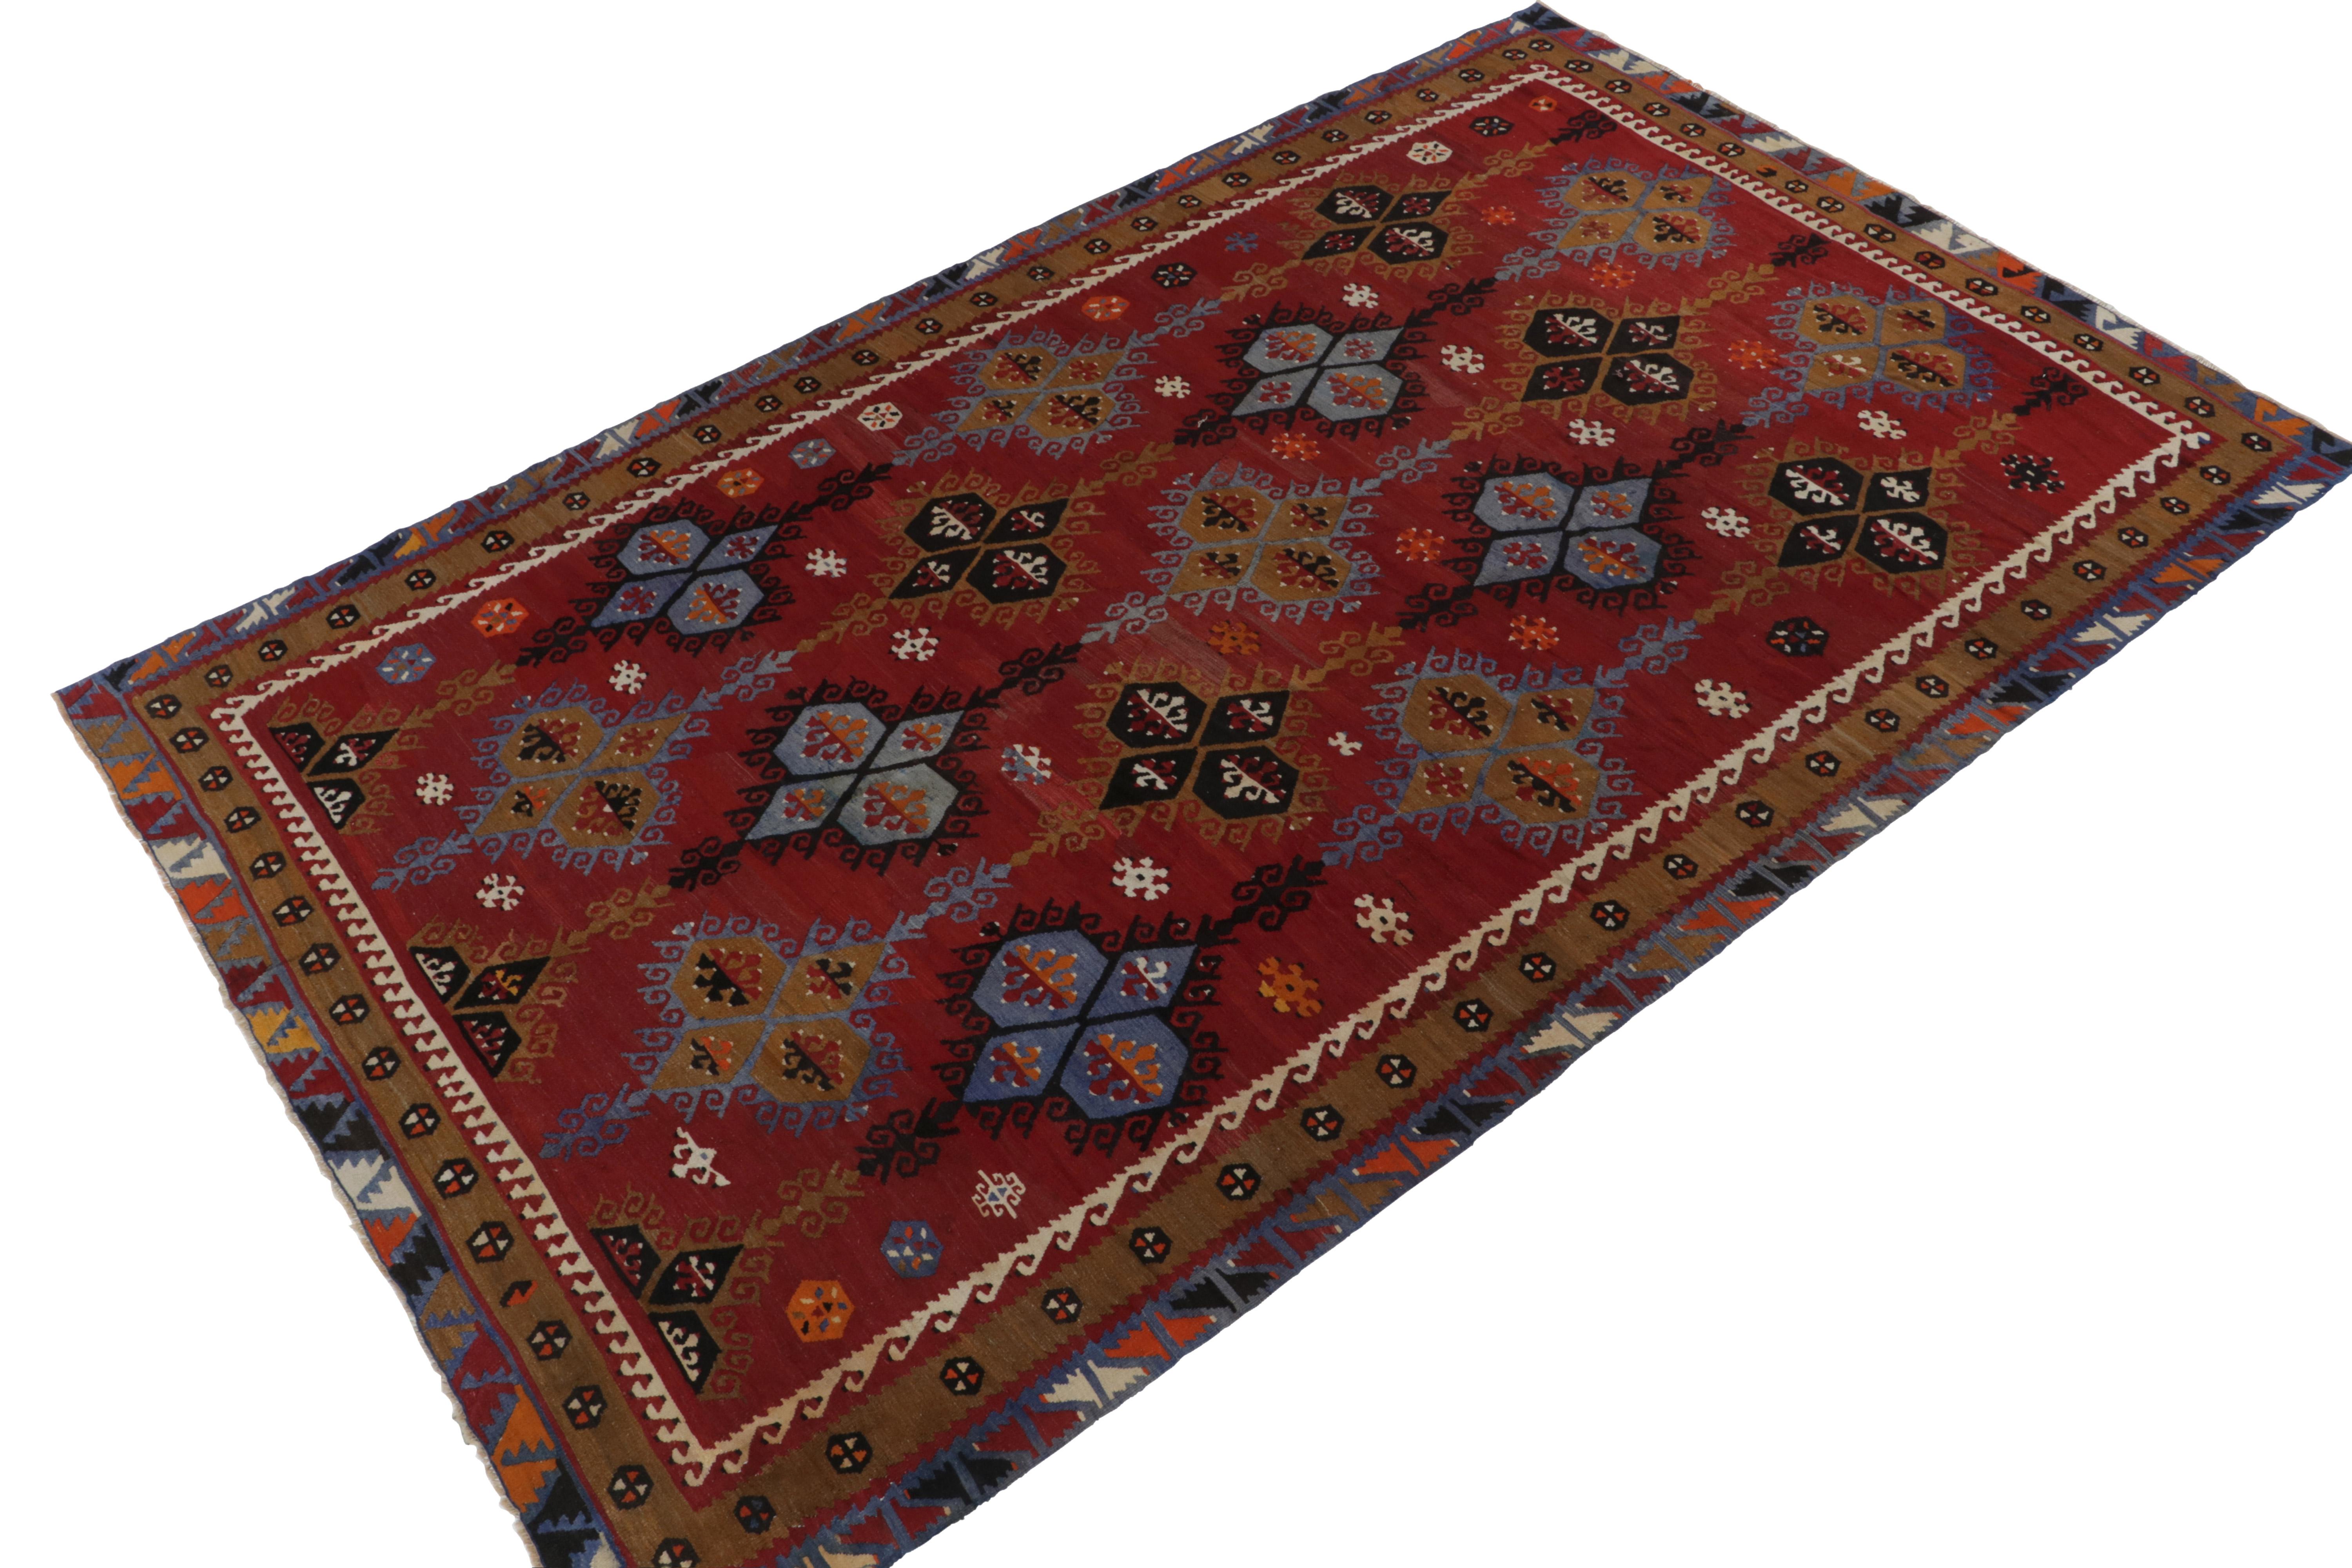 A vintage 7x12 Kilim rug, handwoven in wool originating from Turkey circa 1950-1960. Enjoying a play of tribal motifs and medallions with an especially present, cool blue marrying rich red and brown in the prevailing colorway for a unique presence